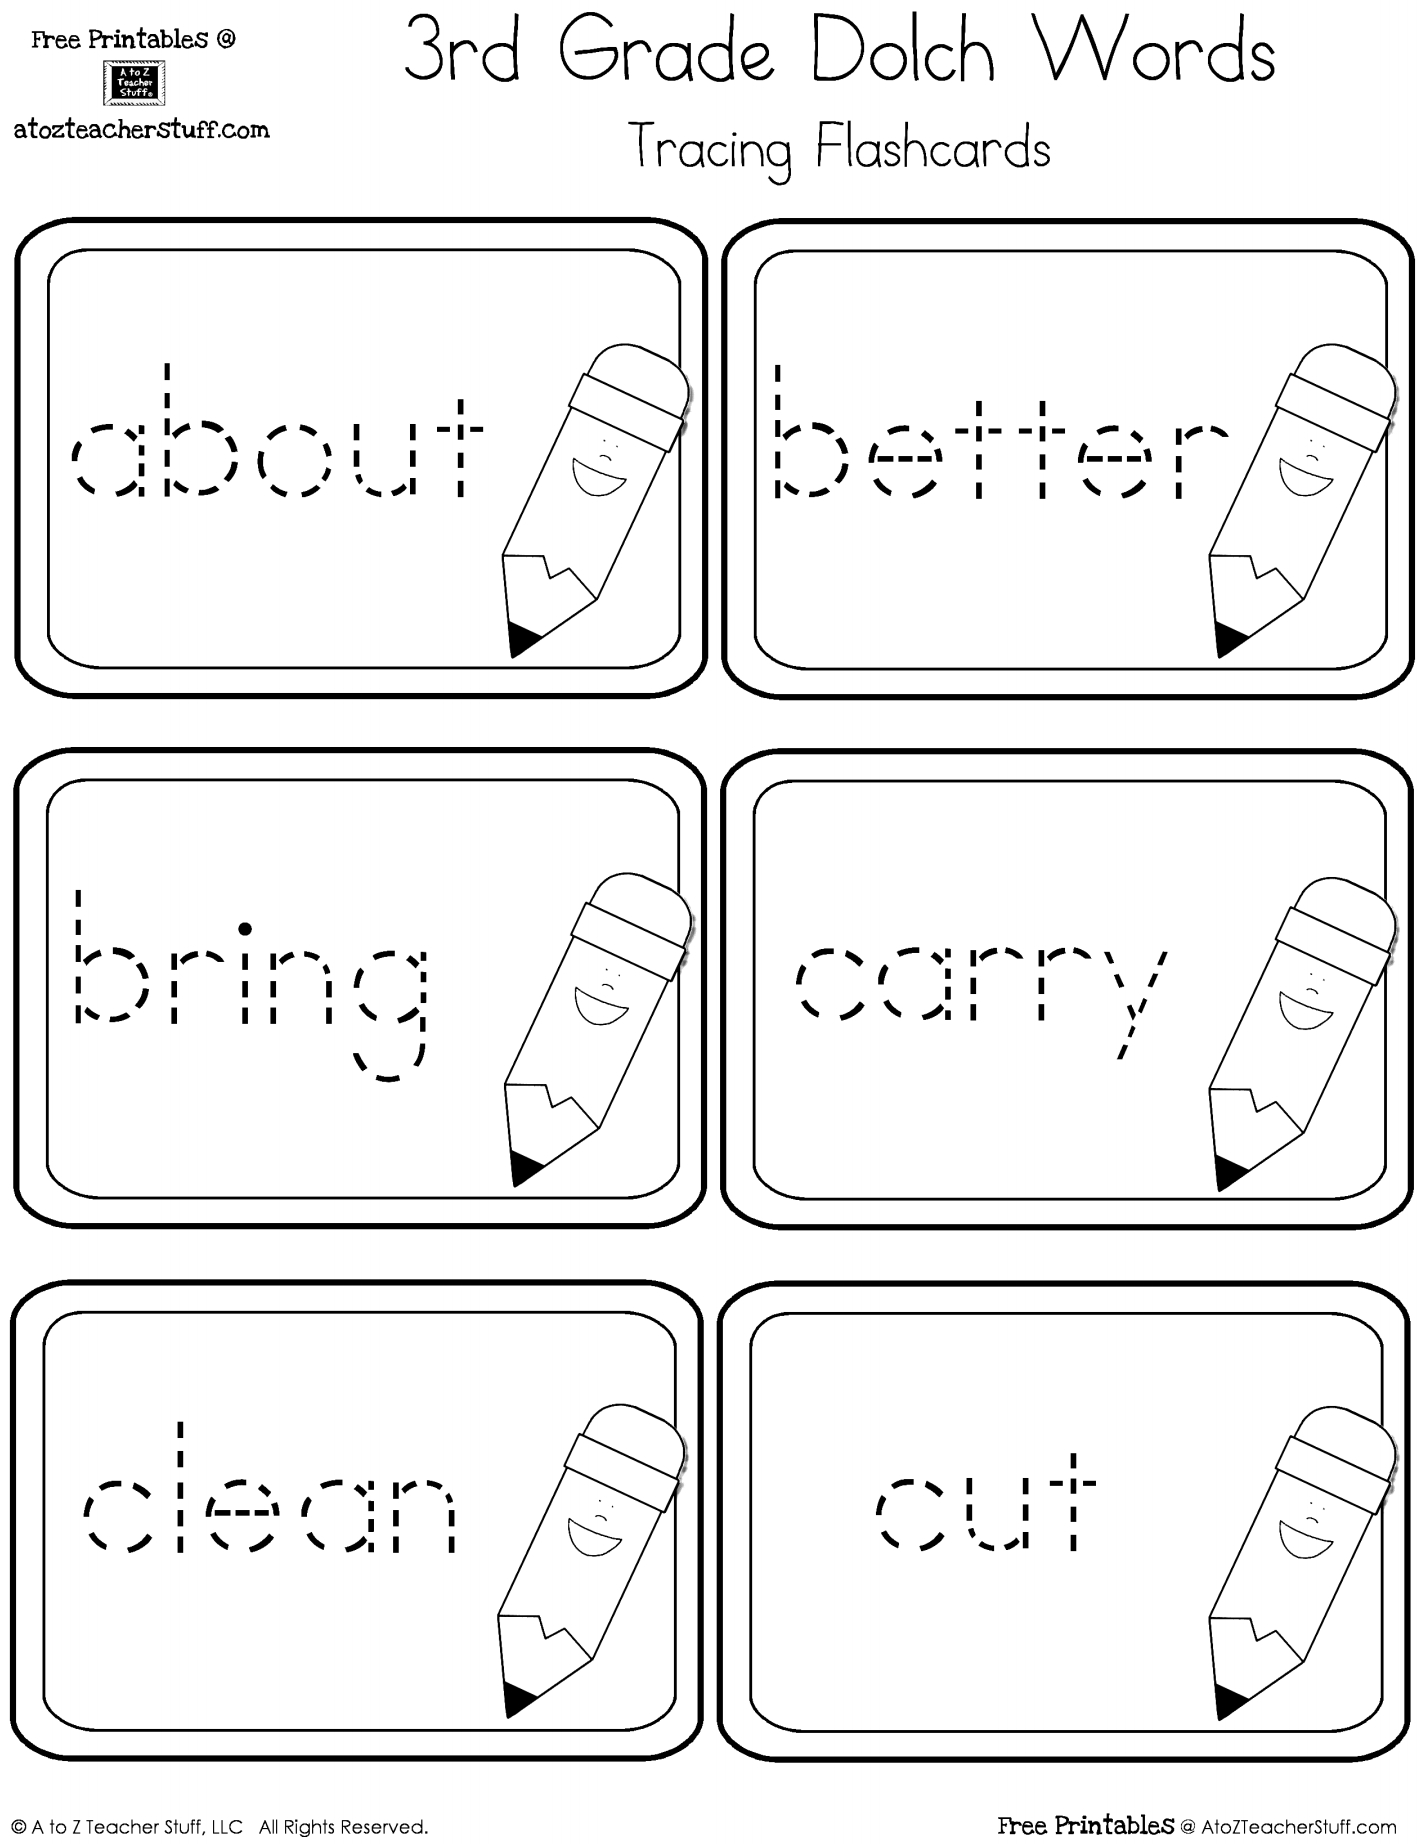 Third Grade Dolch Sight Words Tracing Flashcards  A To Z